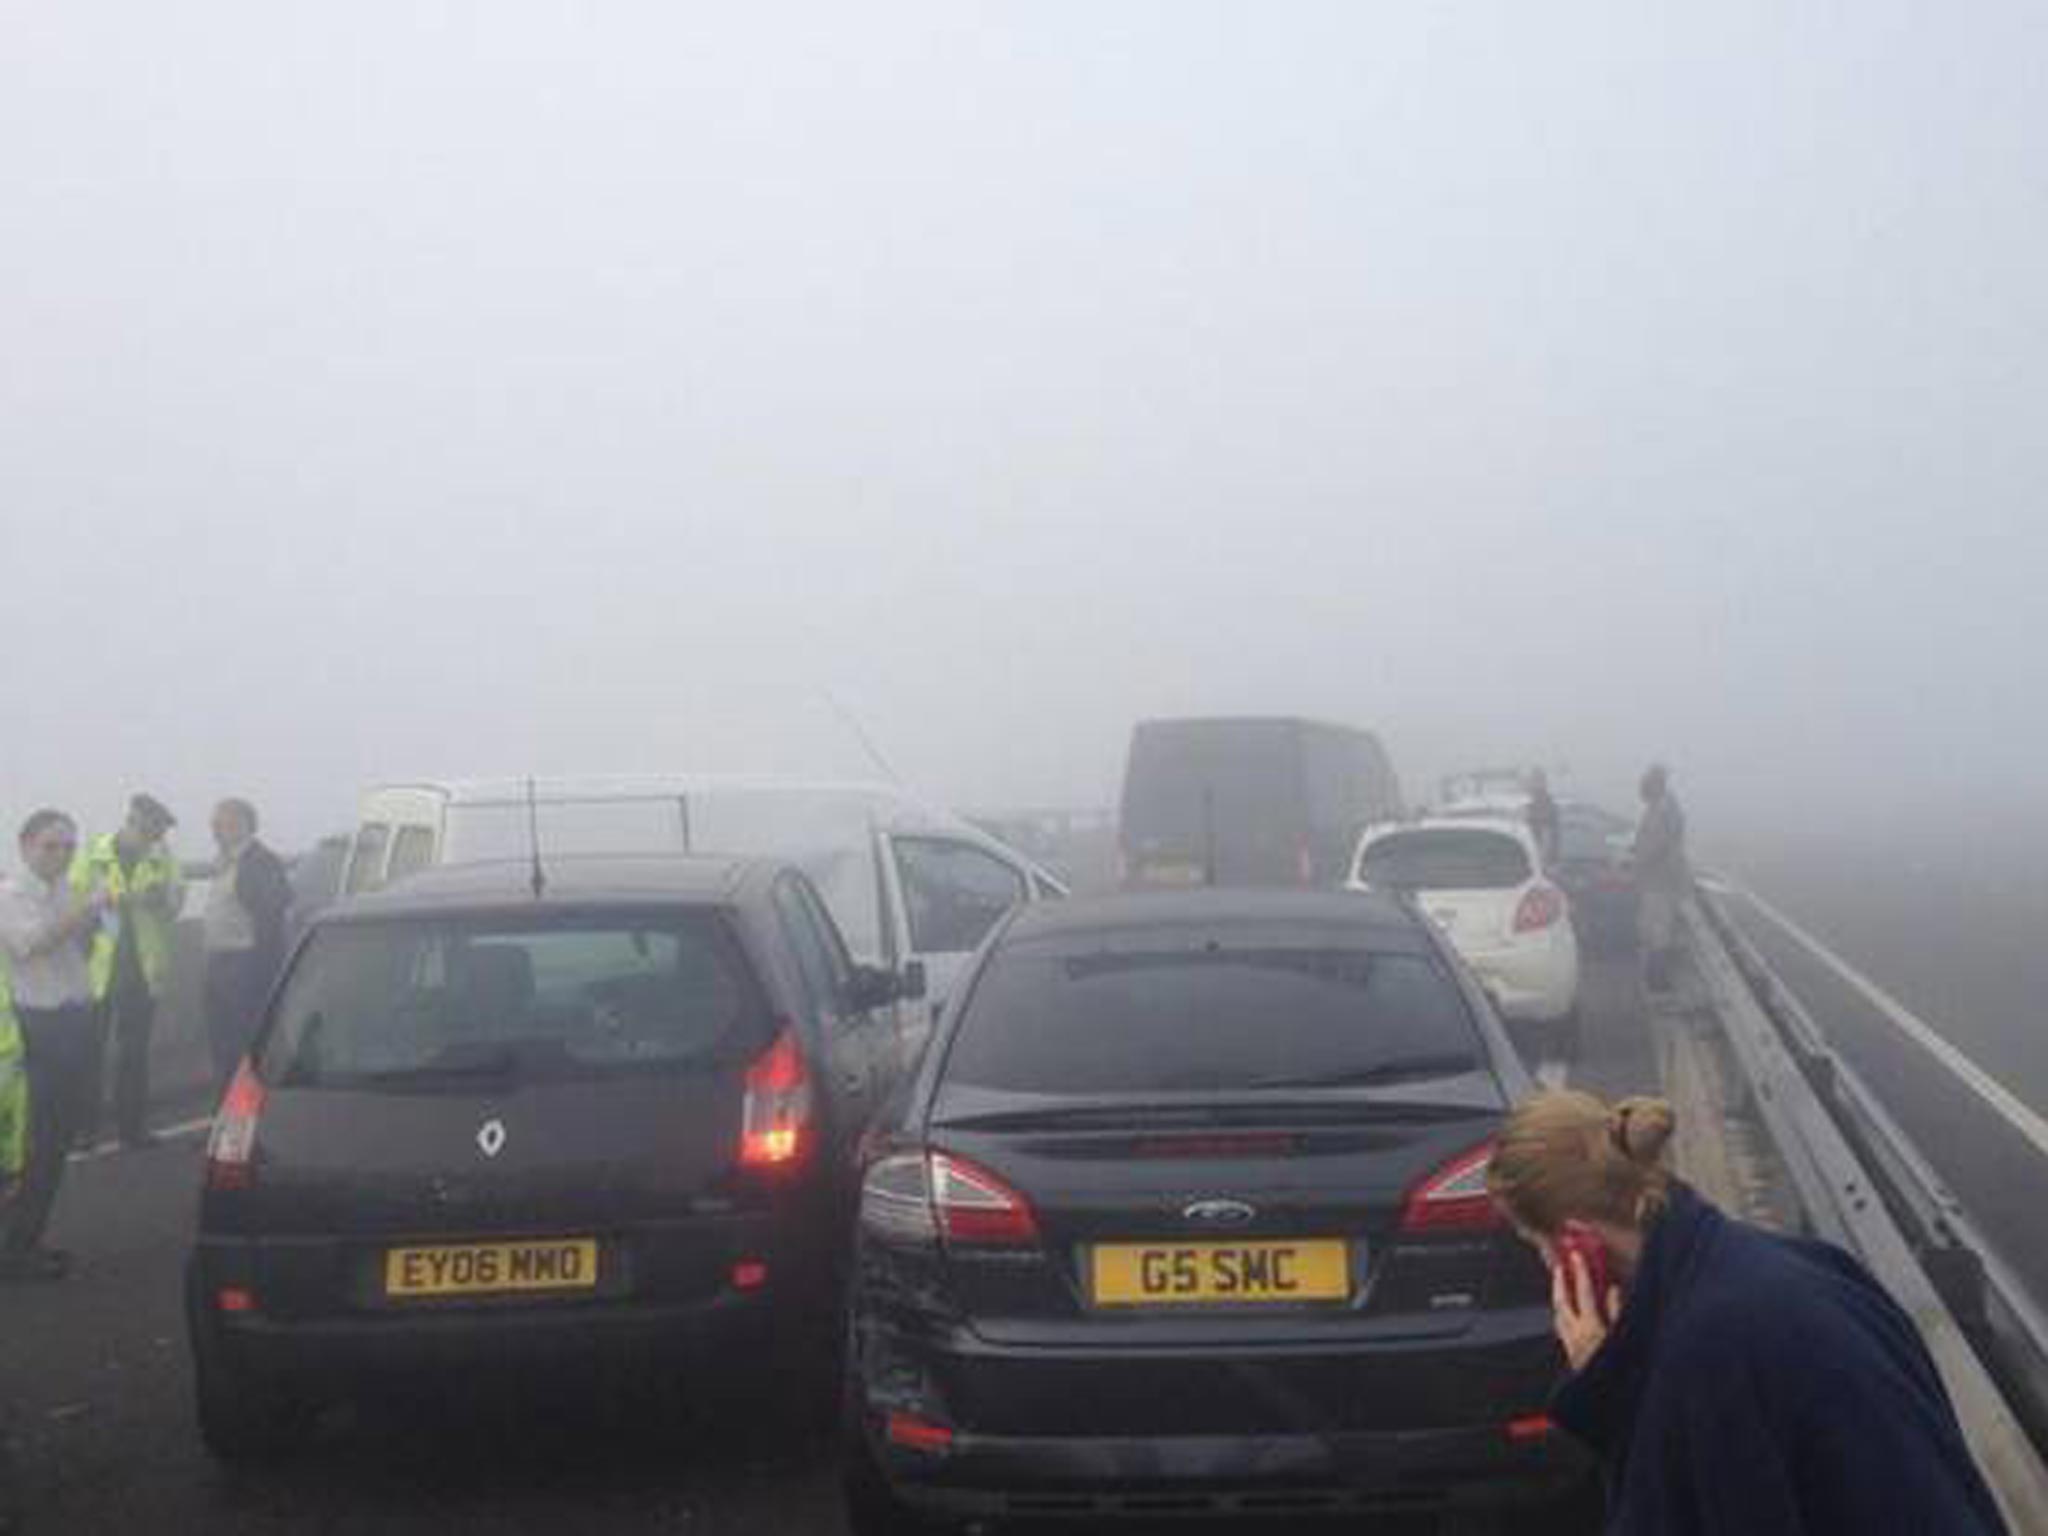 A view of the pile up in Sheppey involving 100 cars